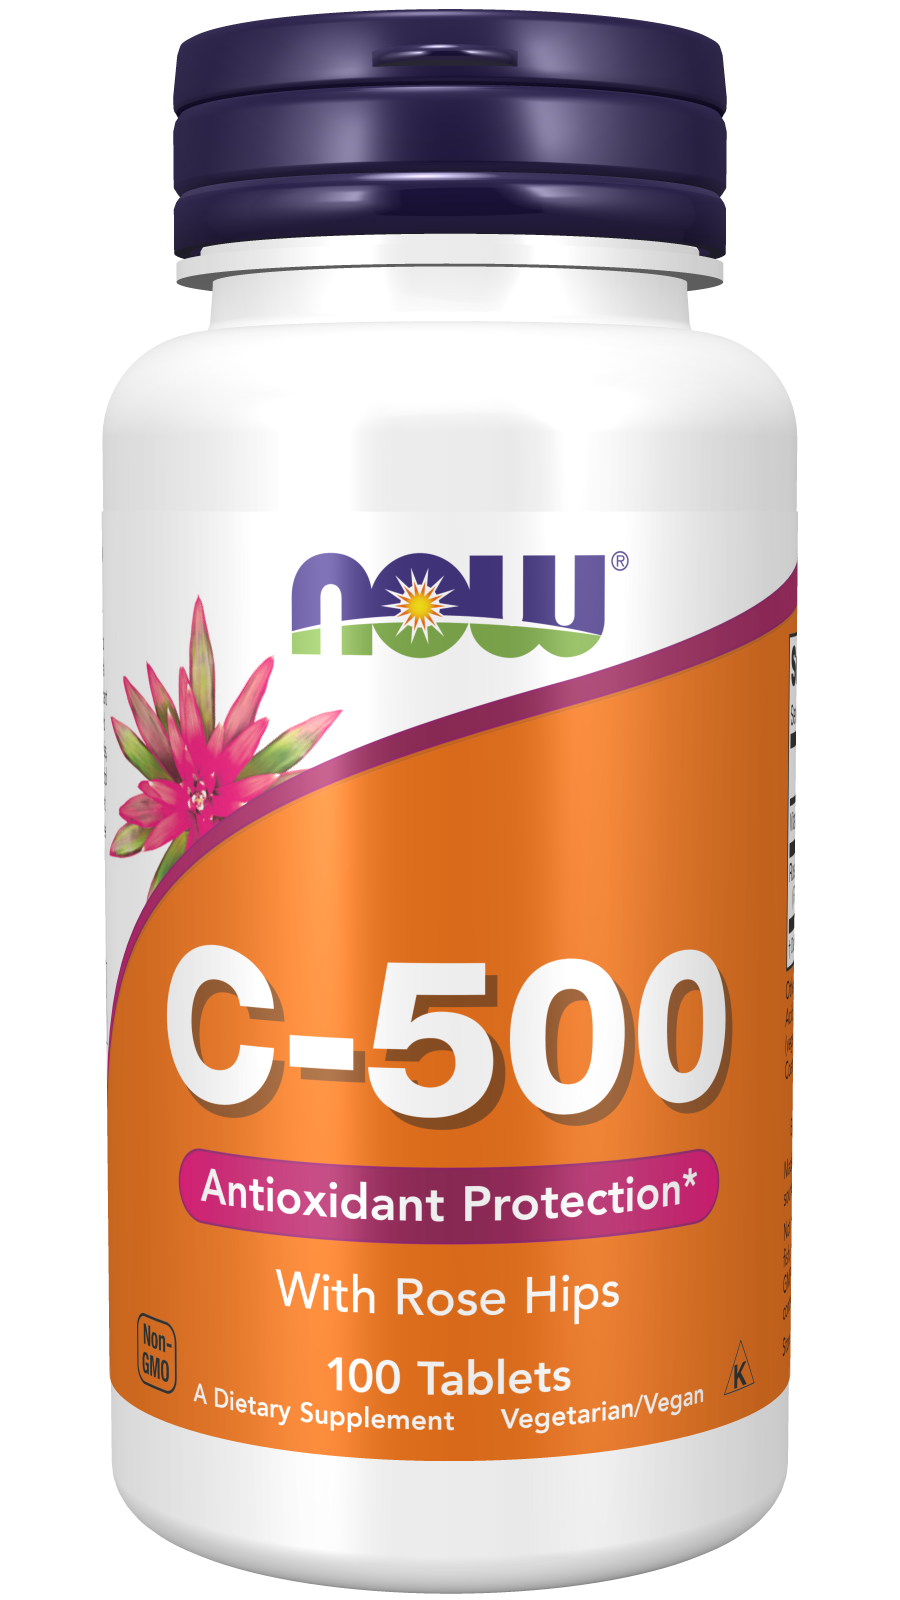 C-500 With Rose Hips Antioxidant Protection* 100 Tablets